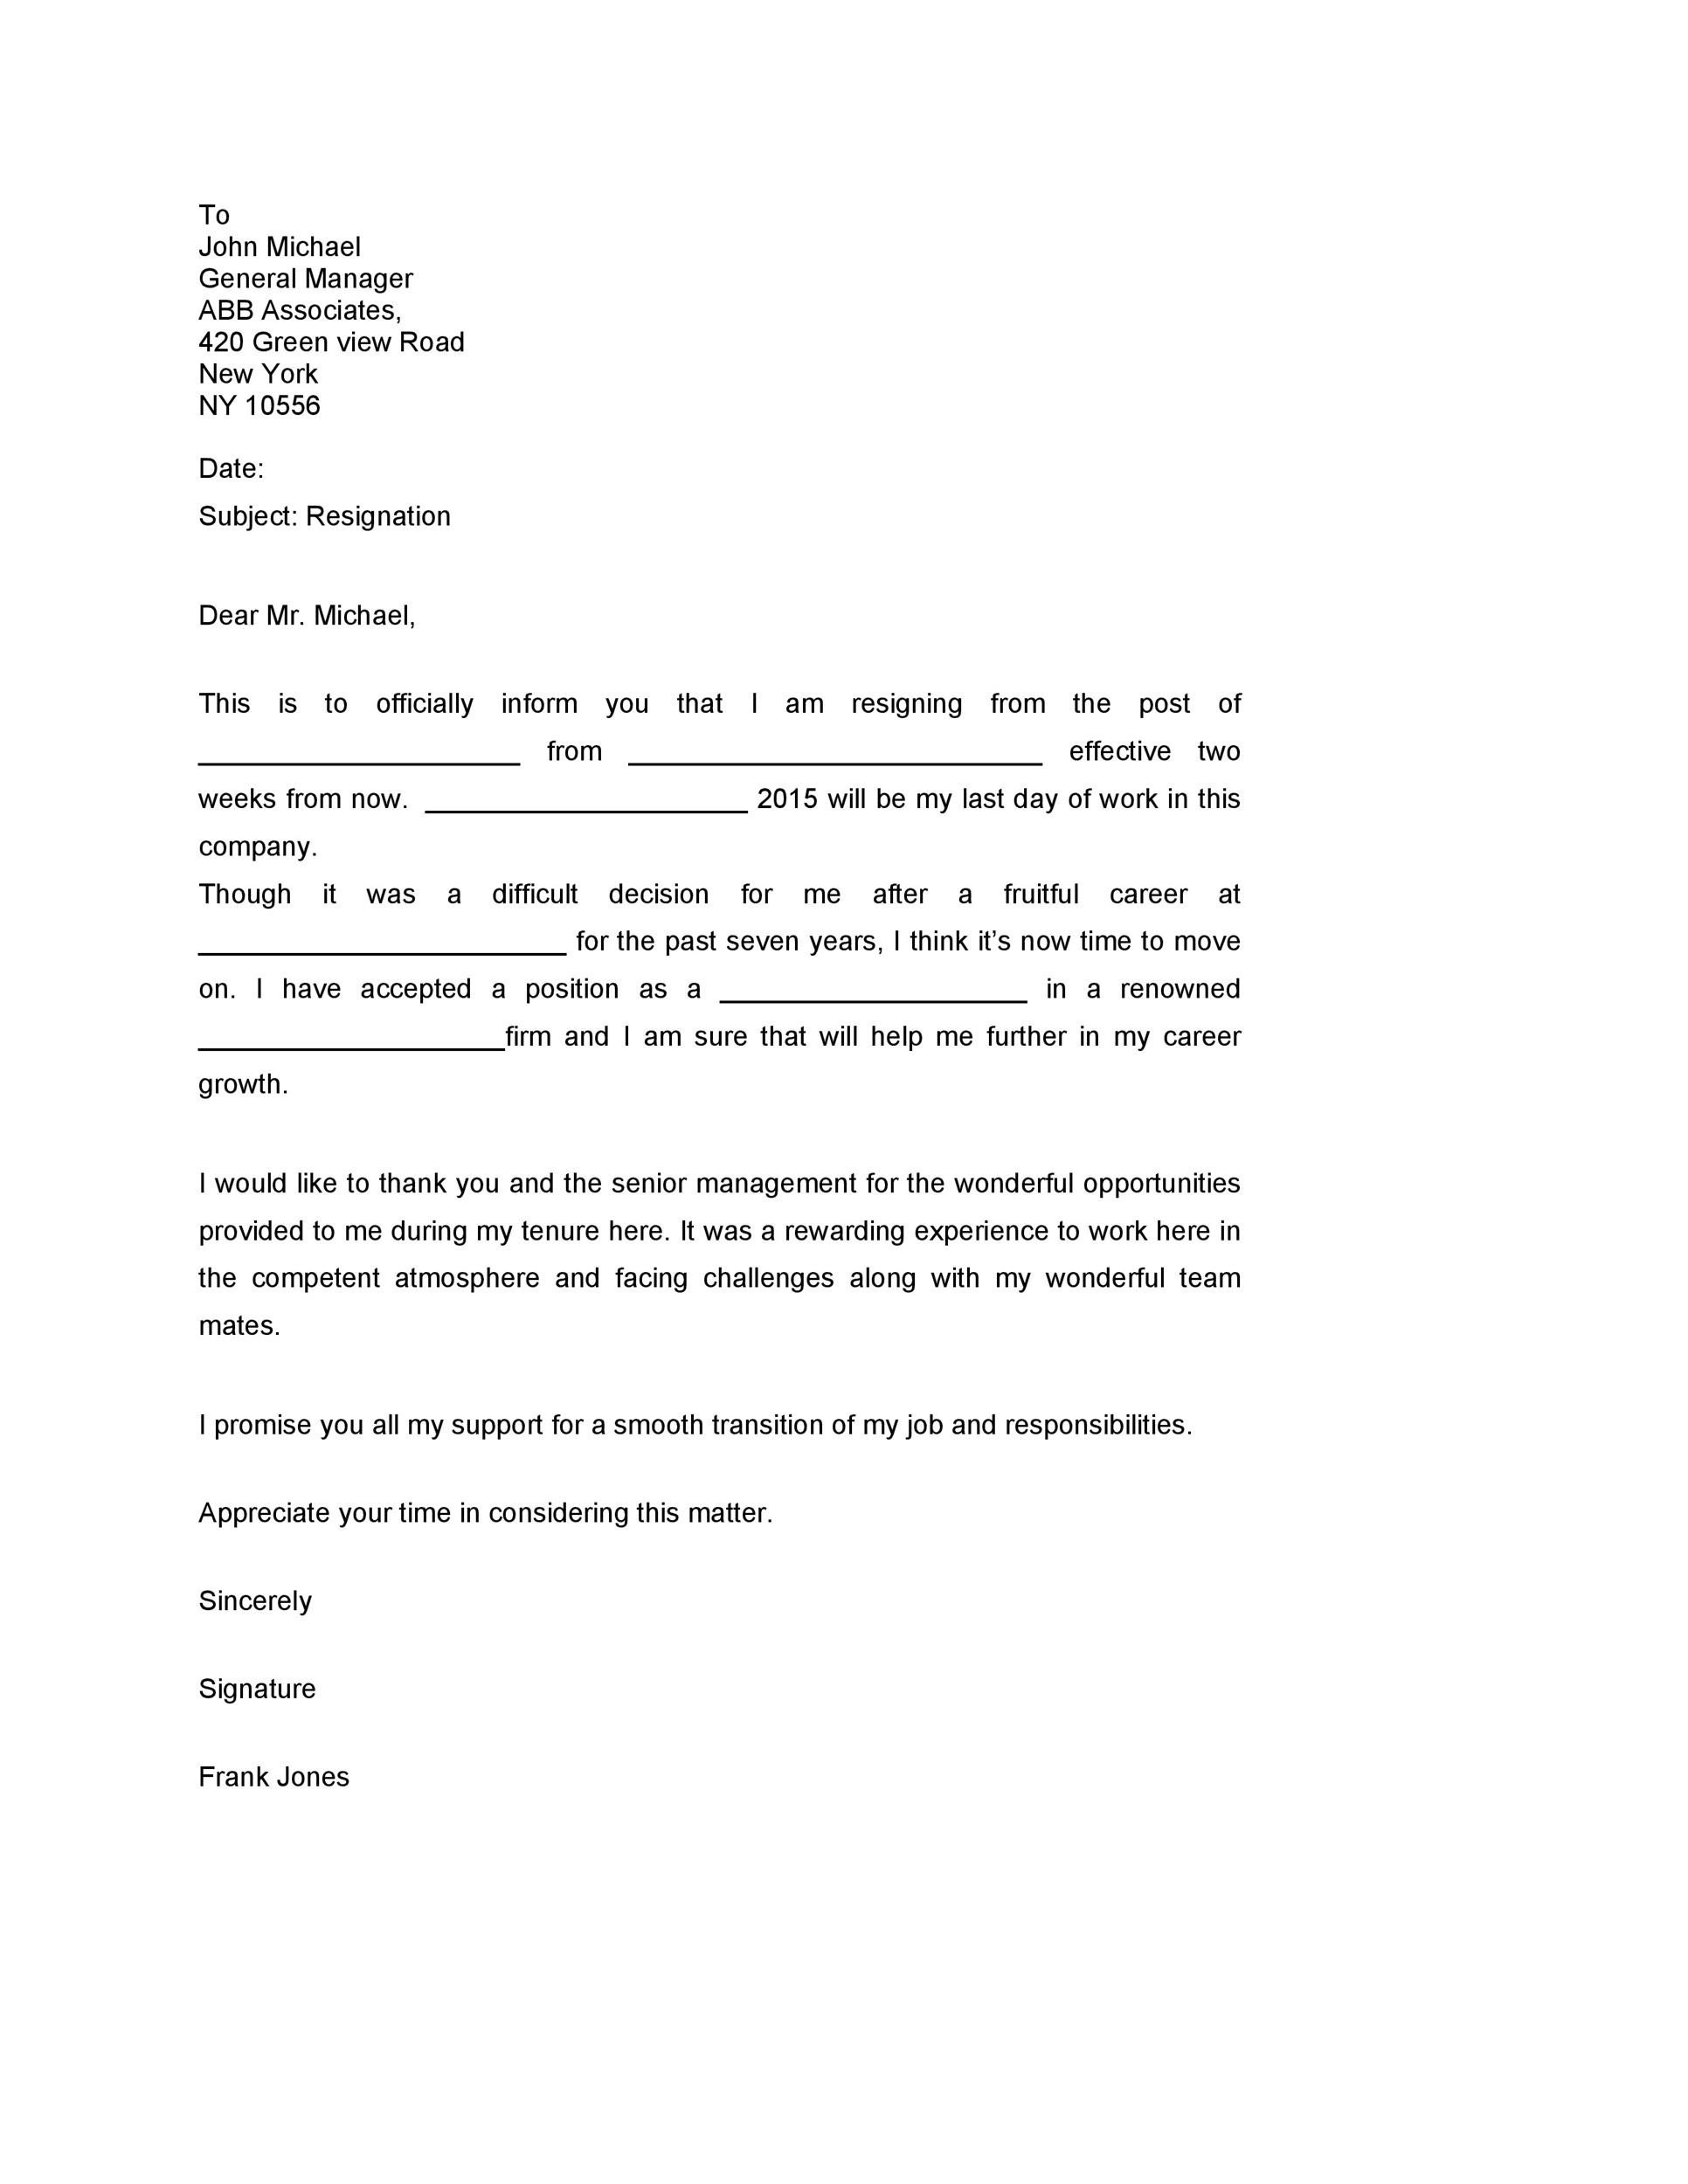 Formal Resignation Letter With 2 Weeks Notice from templatelab.com